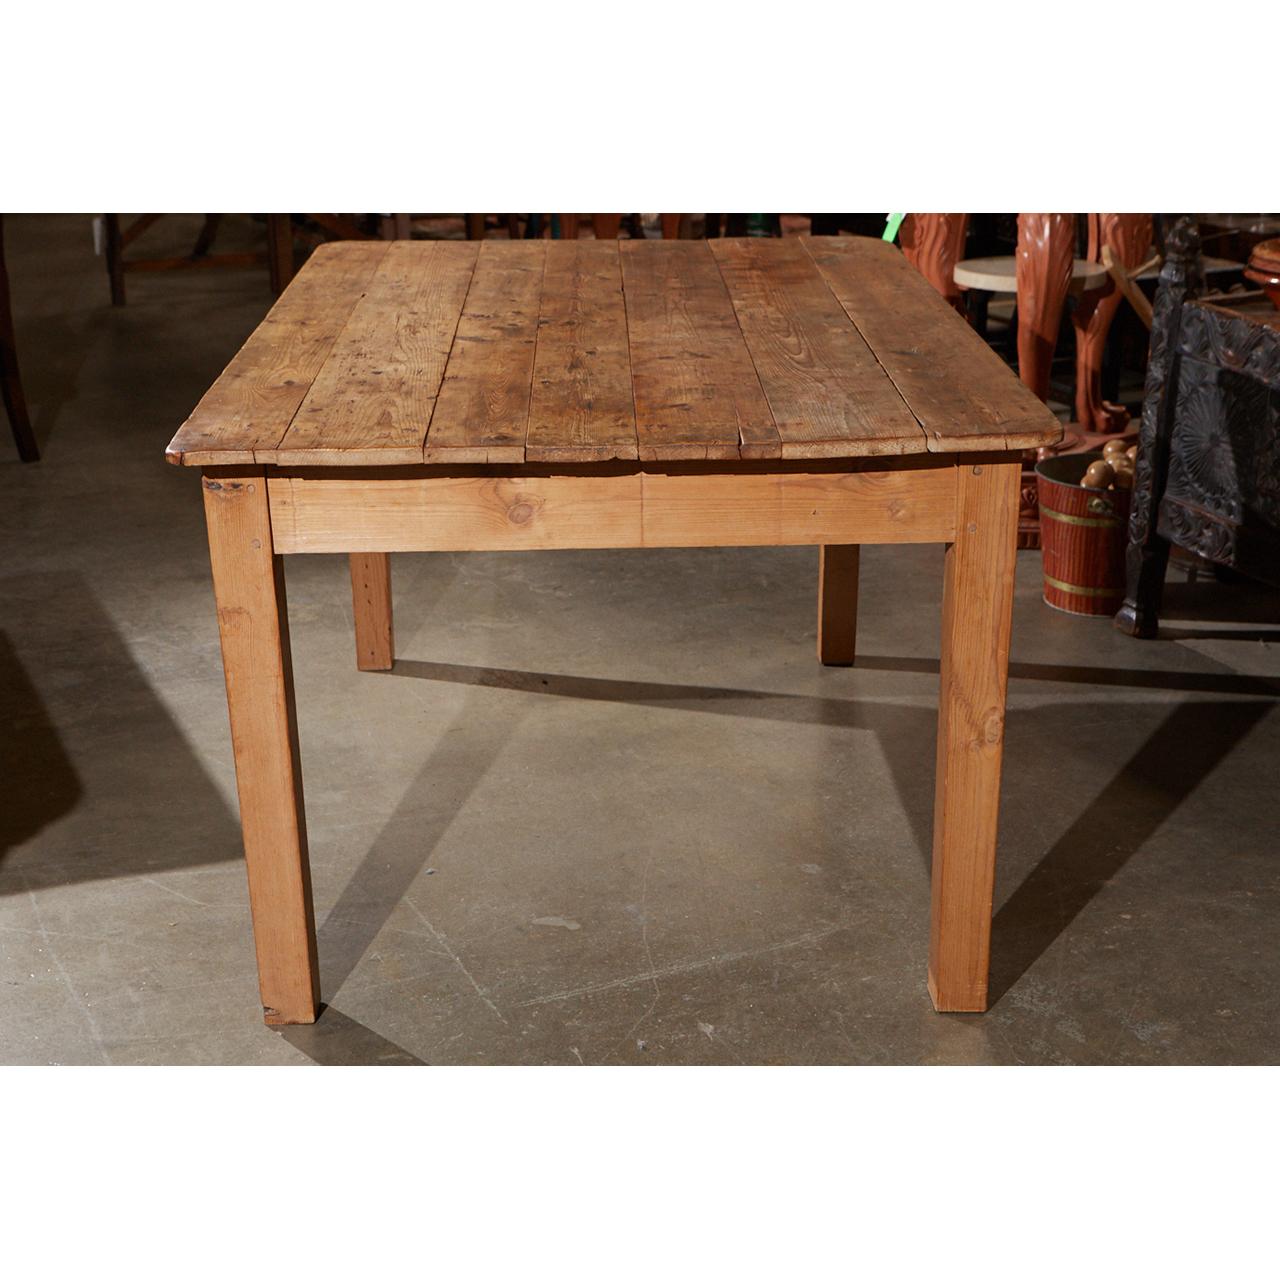 20th Century Rustic Country Pine Table